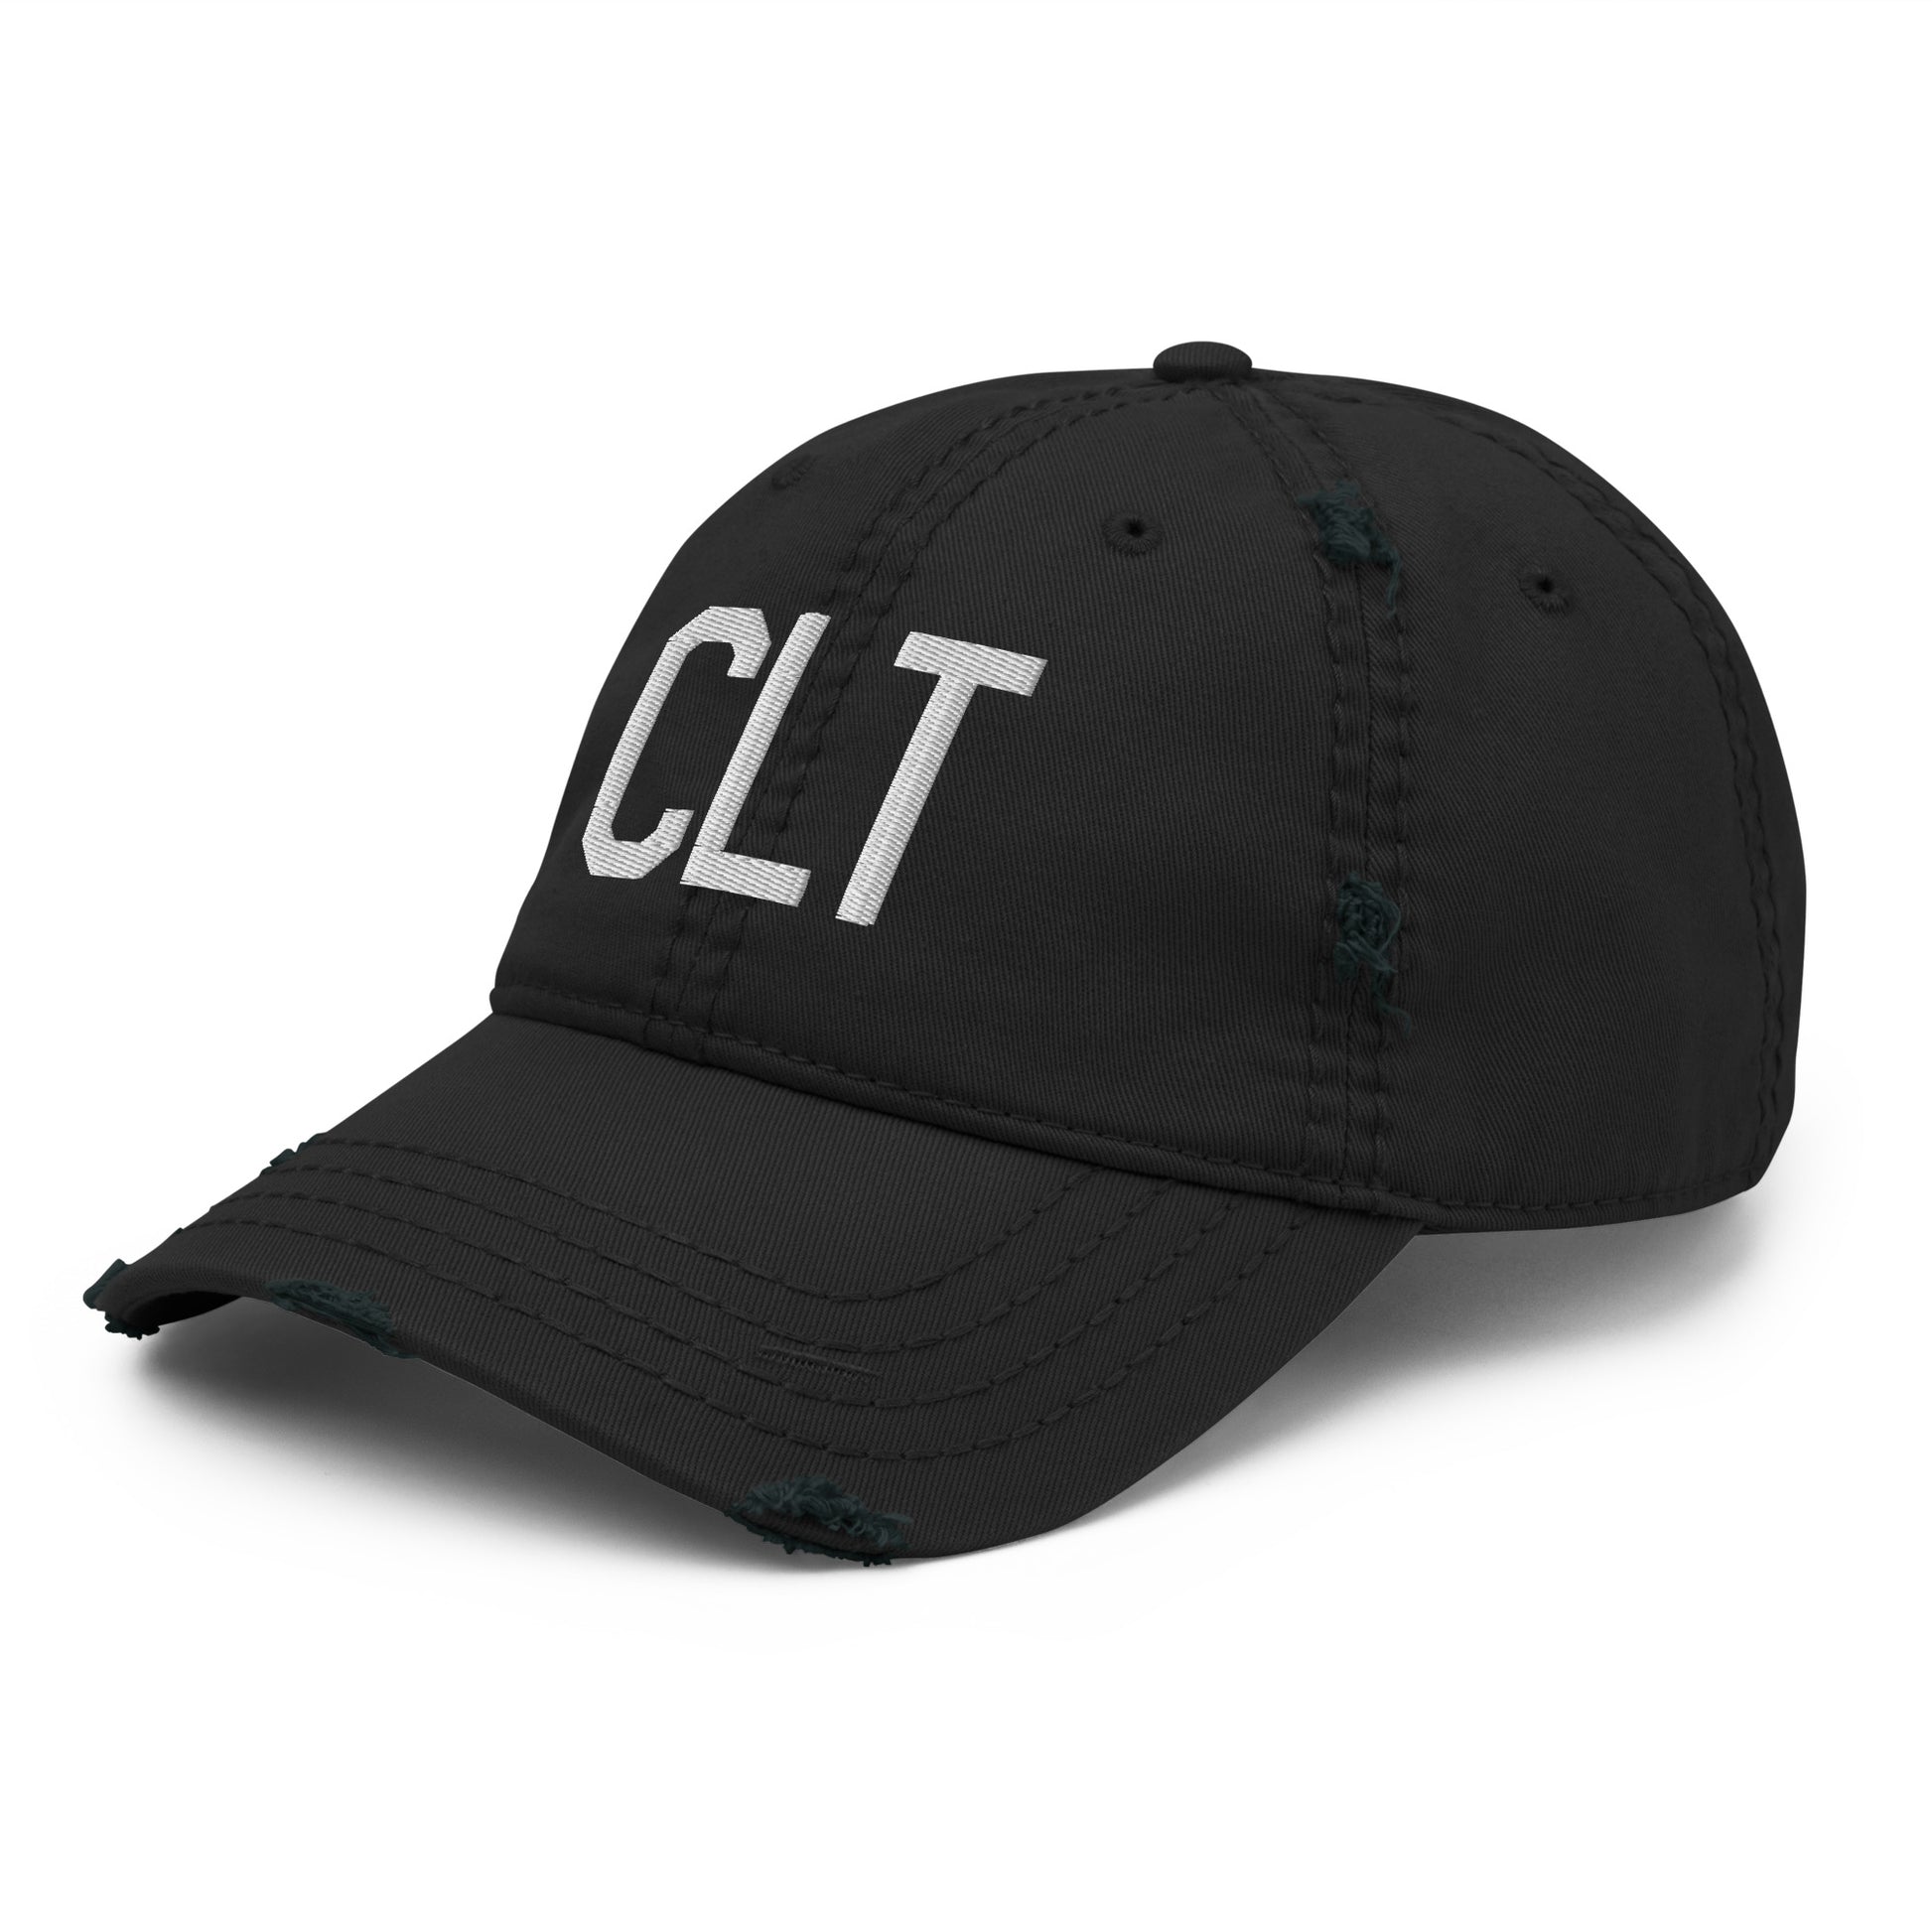 Airport Code Distressed Hat - White • CLT Charlotte • YHM Designs - Image 11